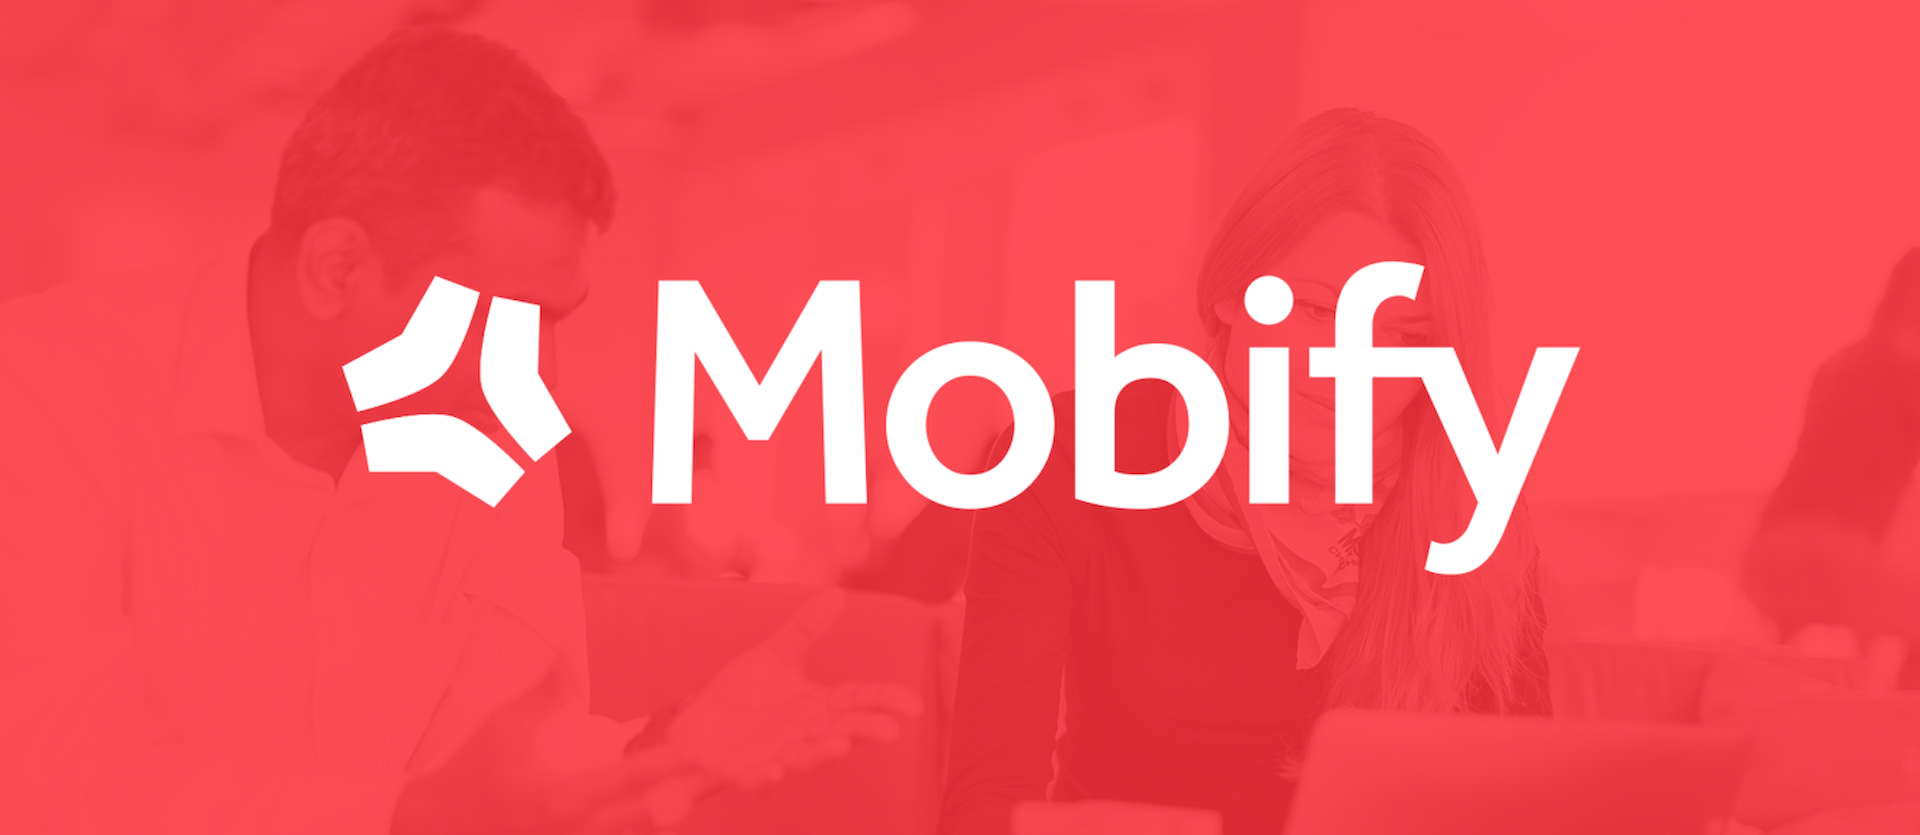 AND Digital and Mobify Join Forces To Deliver Superior, Customer-led Experiences (1)